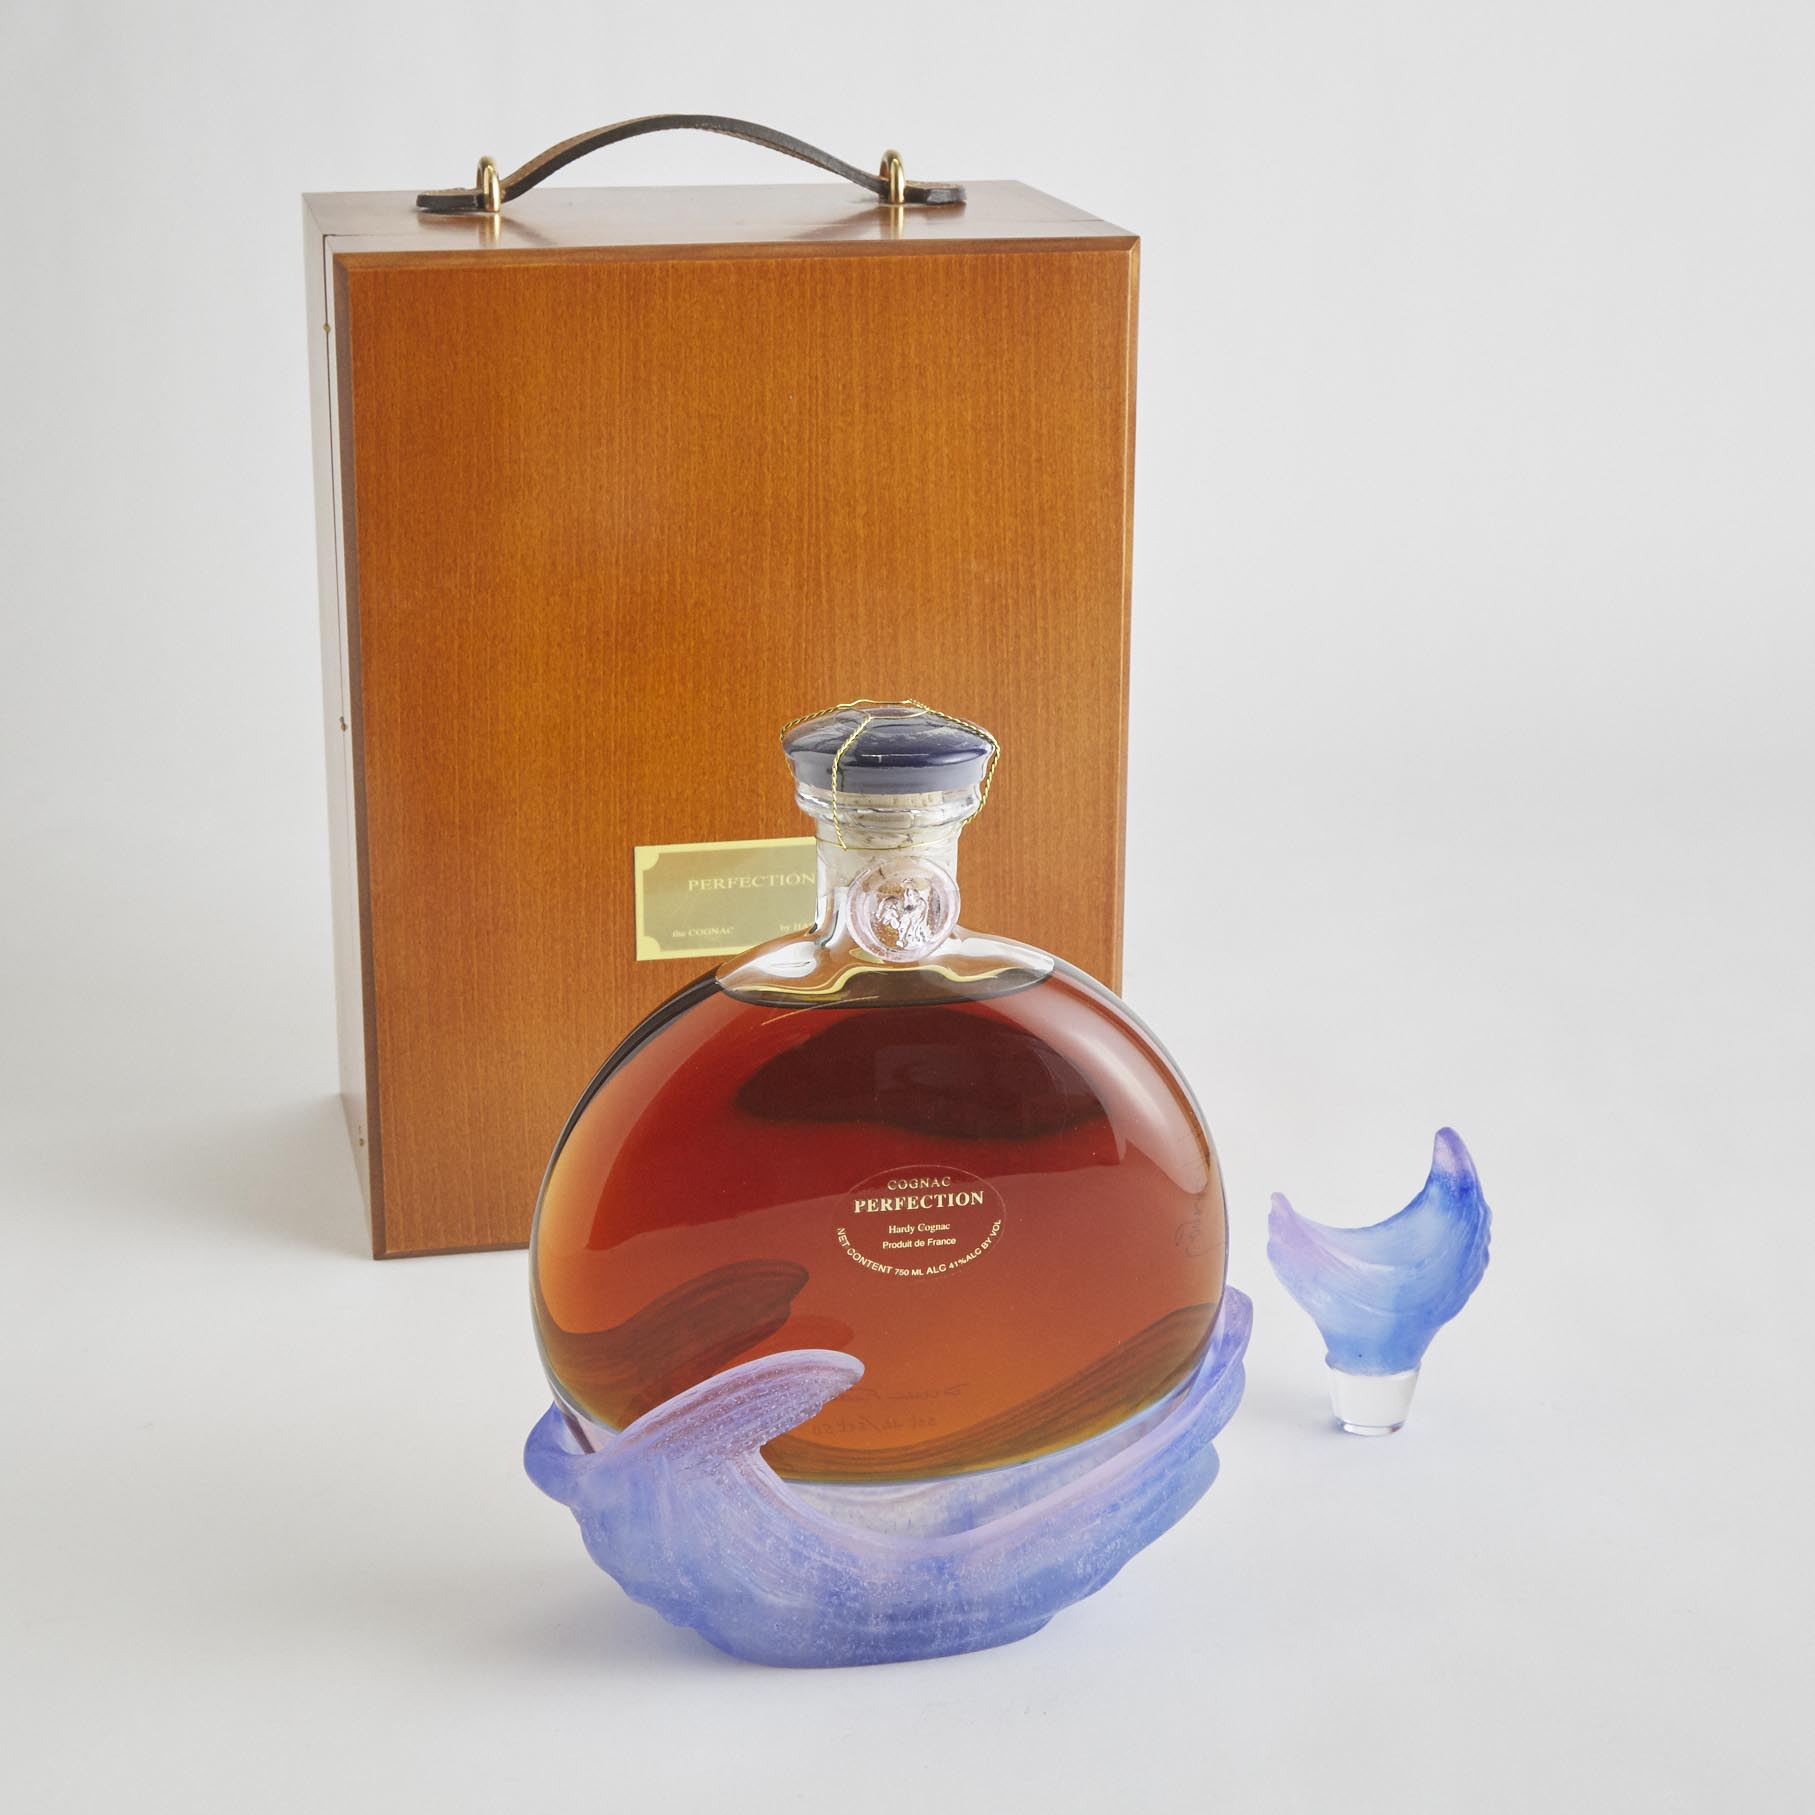 HARDY'S PERFECTION COGNAC "AIR" (ONE 750 ML)